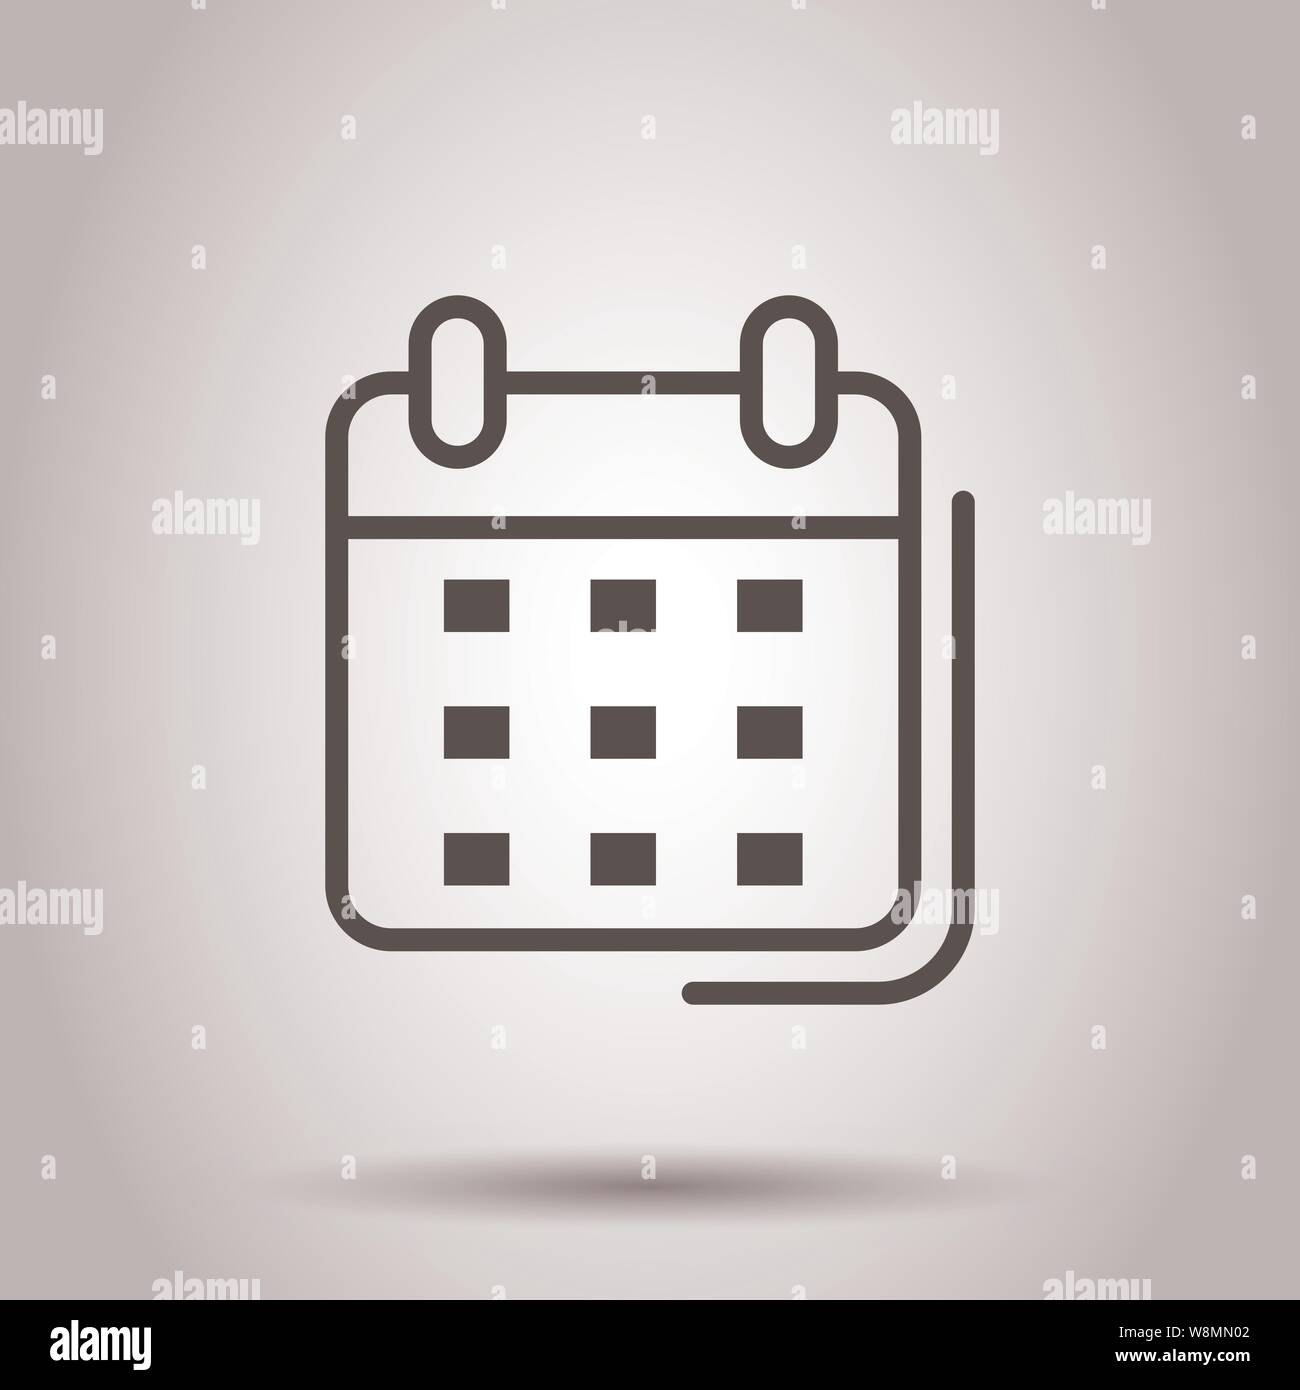 Calendar organizer icon in transparent style. Appointment event vector illustration on isolated background. Month deadline business concept. Stock Vector